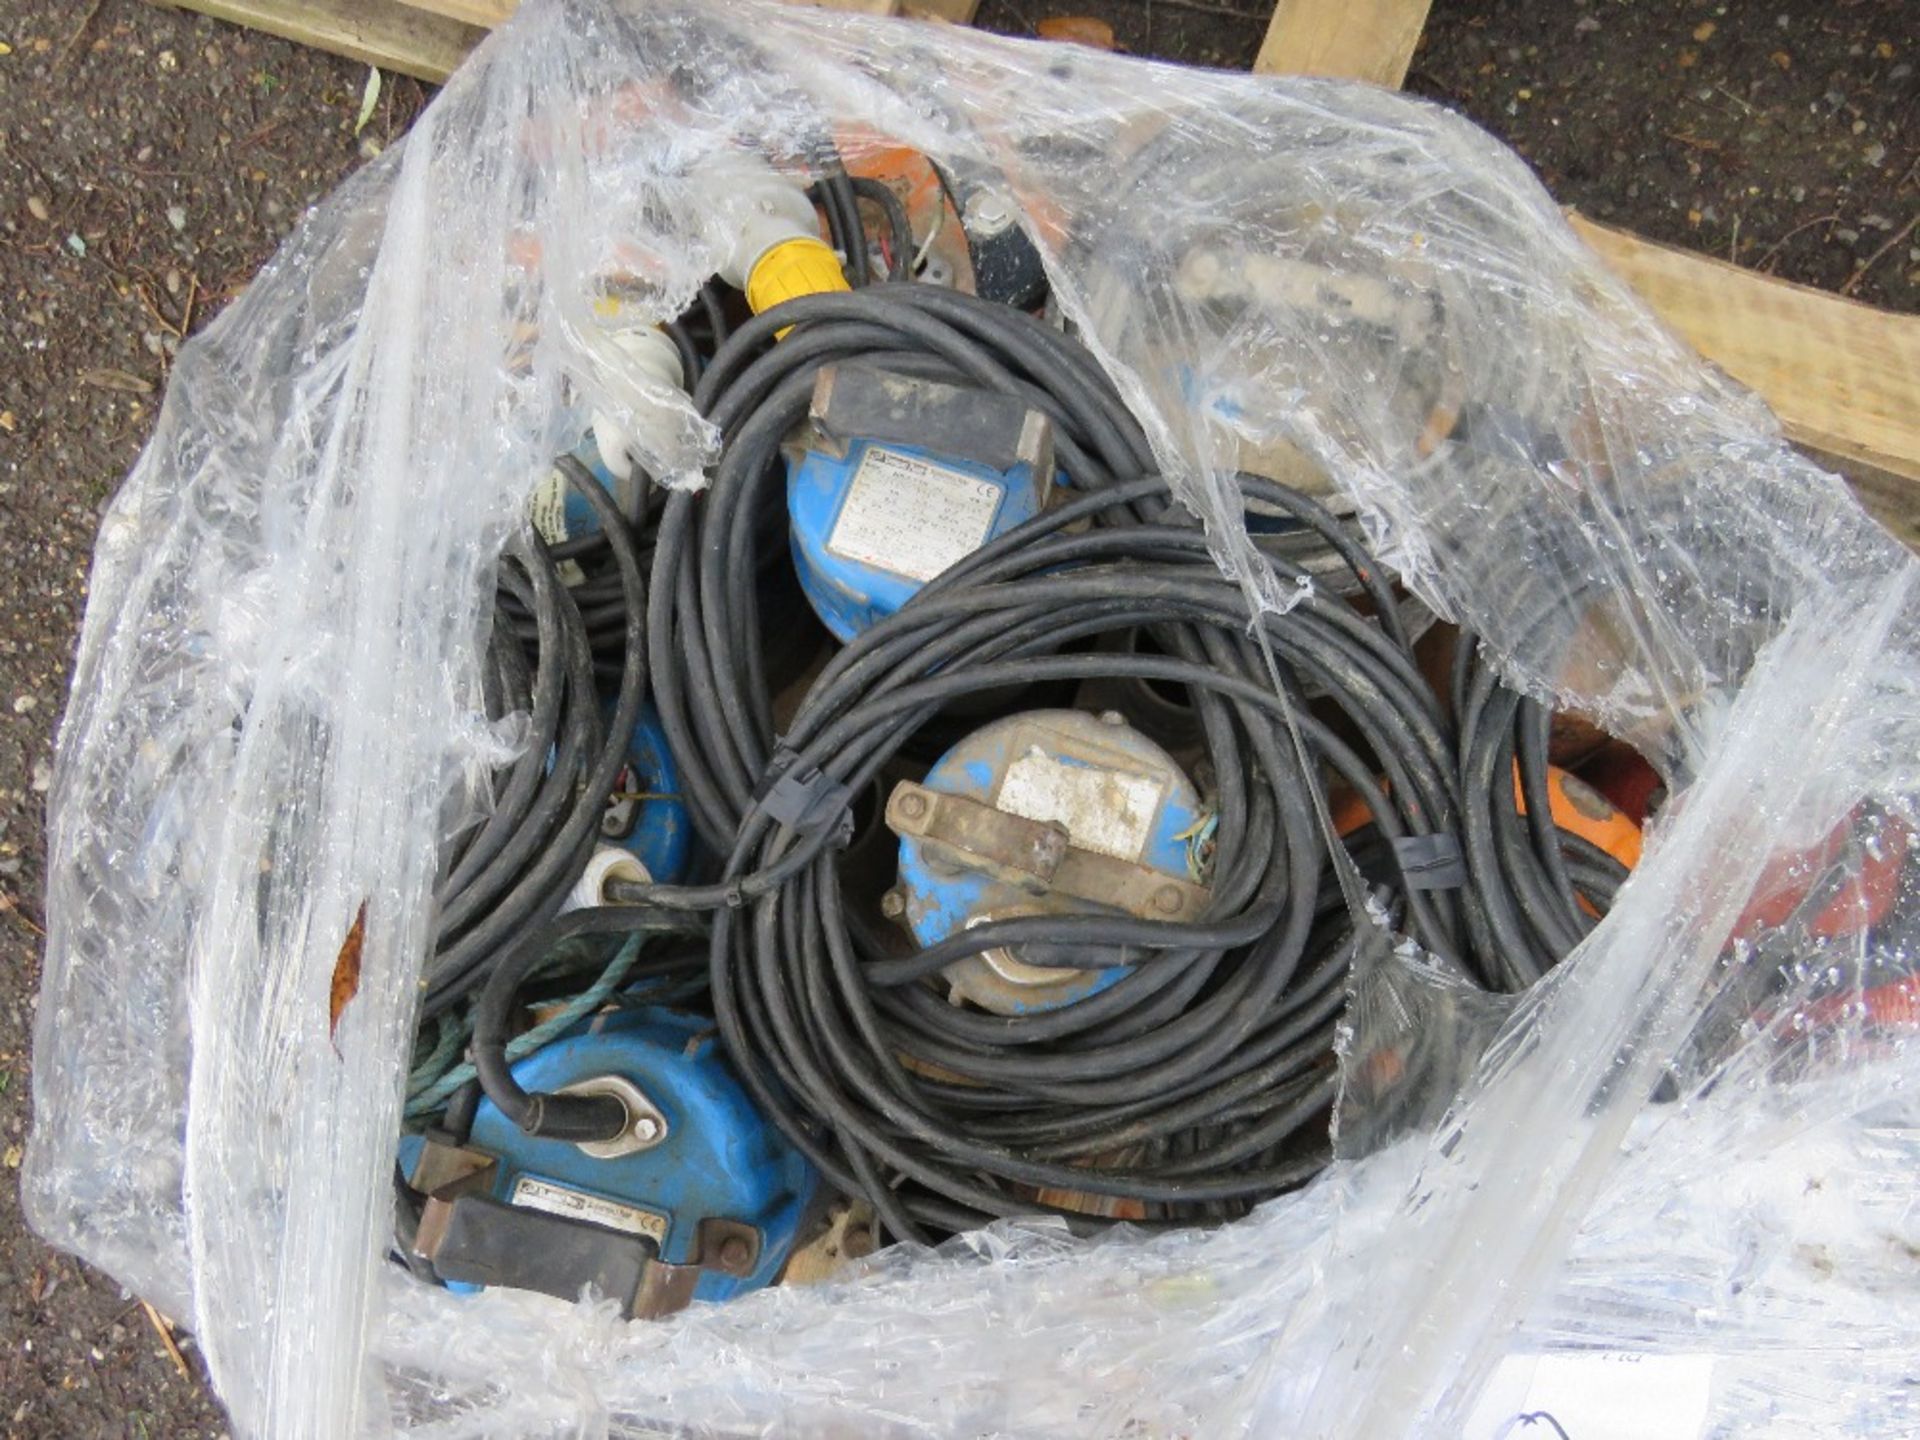 PALLET OF SUBMERSIBLE WATER PUMPS. 15NO APPROX. CONDITION UNKNOWN. BELIEVED TO BE 110VOLT POWERED. - Image 2 of 4